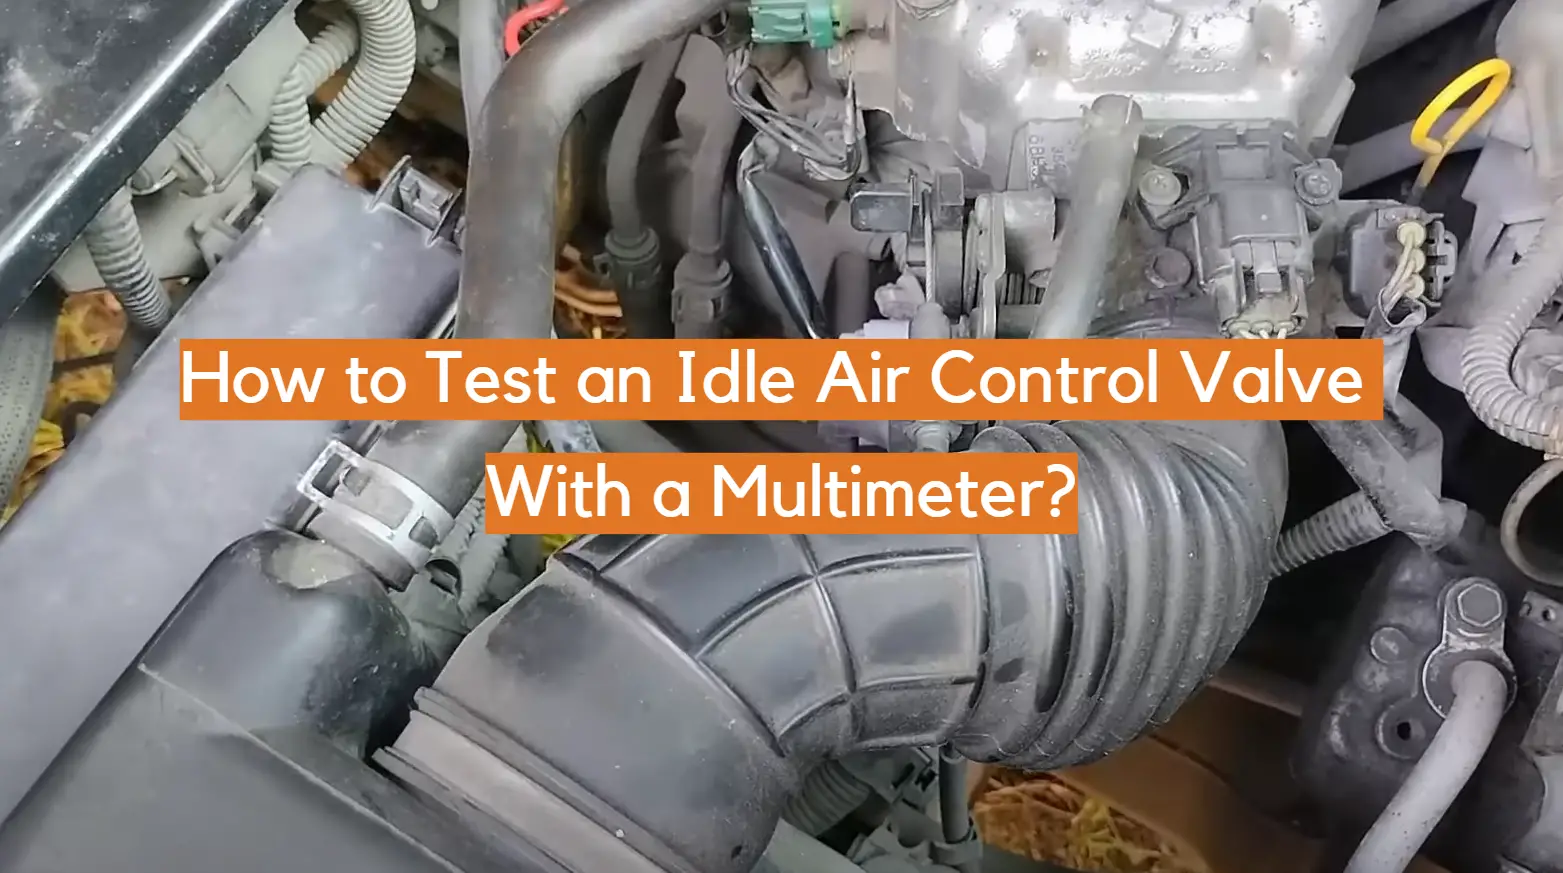 How to Test an Idle Air Control Valve With a Multimeter?